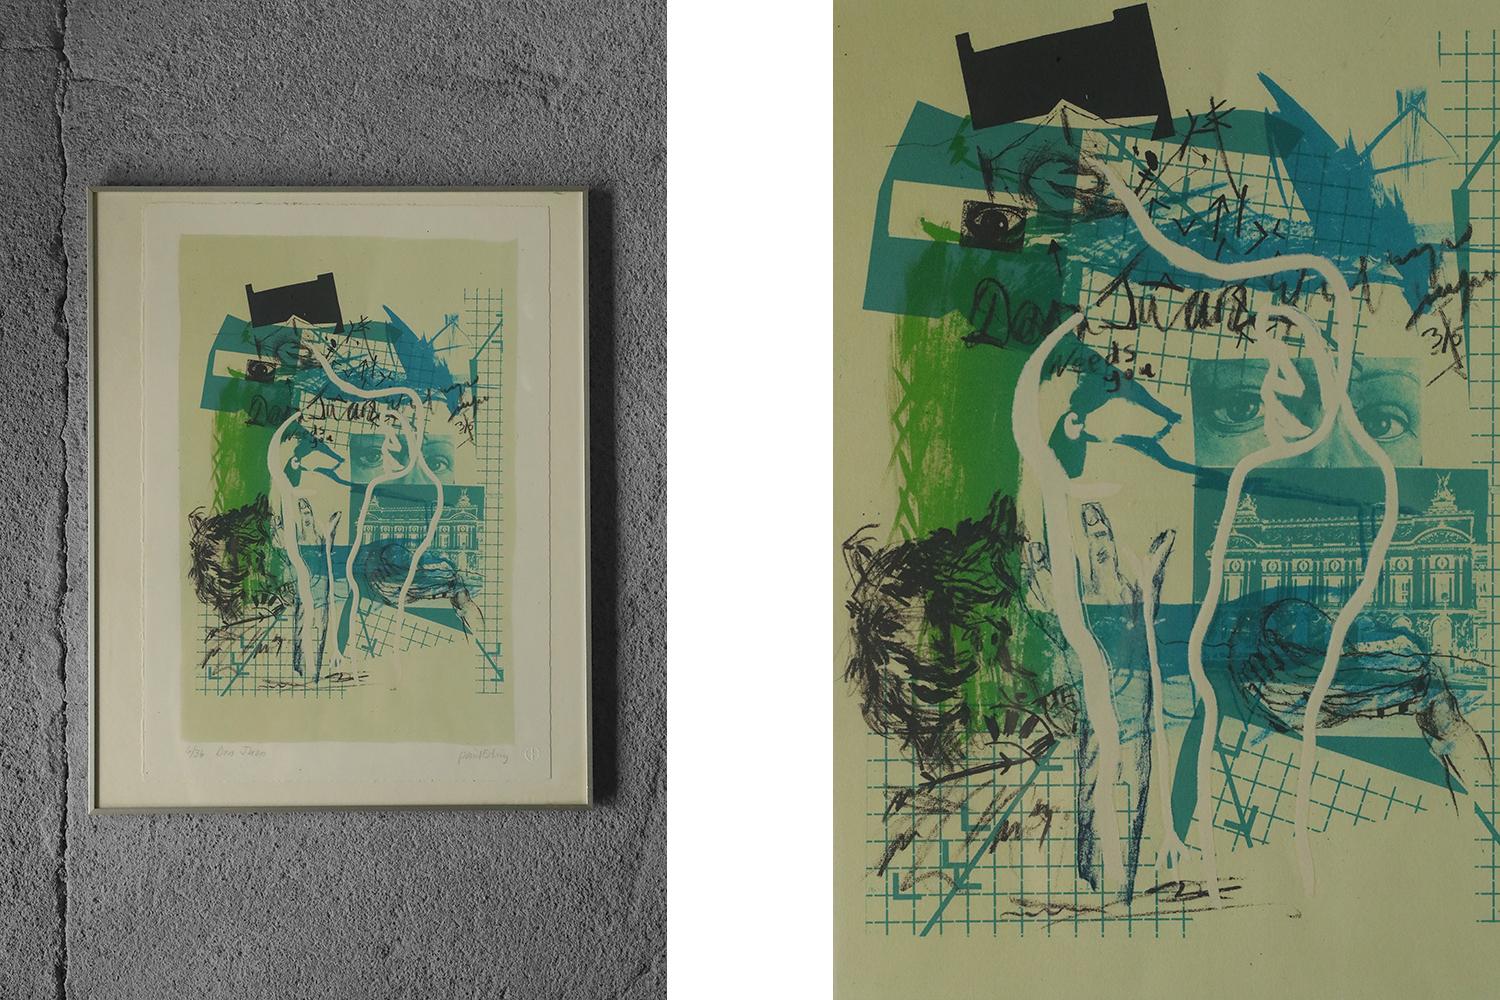 Poul Esting, Don Juan
Color lithography
Number 6/36
Work with signature and individual number and title (pencil)
Work dimensions 50/40
Framed work

Poul Esting is a Danish artist born in 1943. His works are dynamic, often in surprising tones.